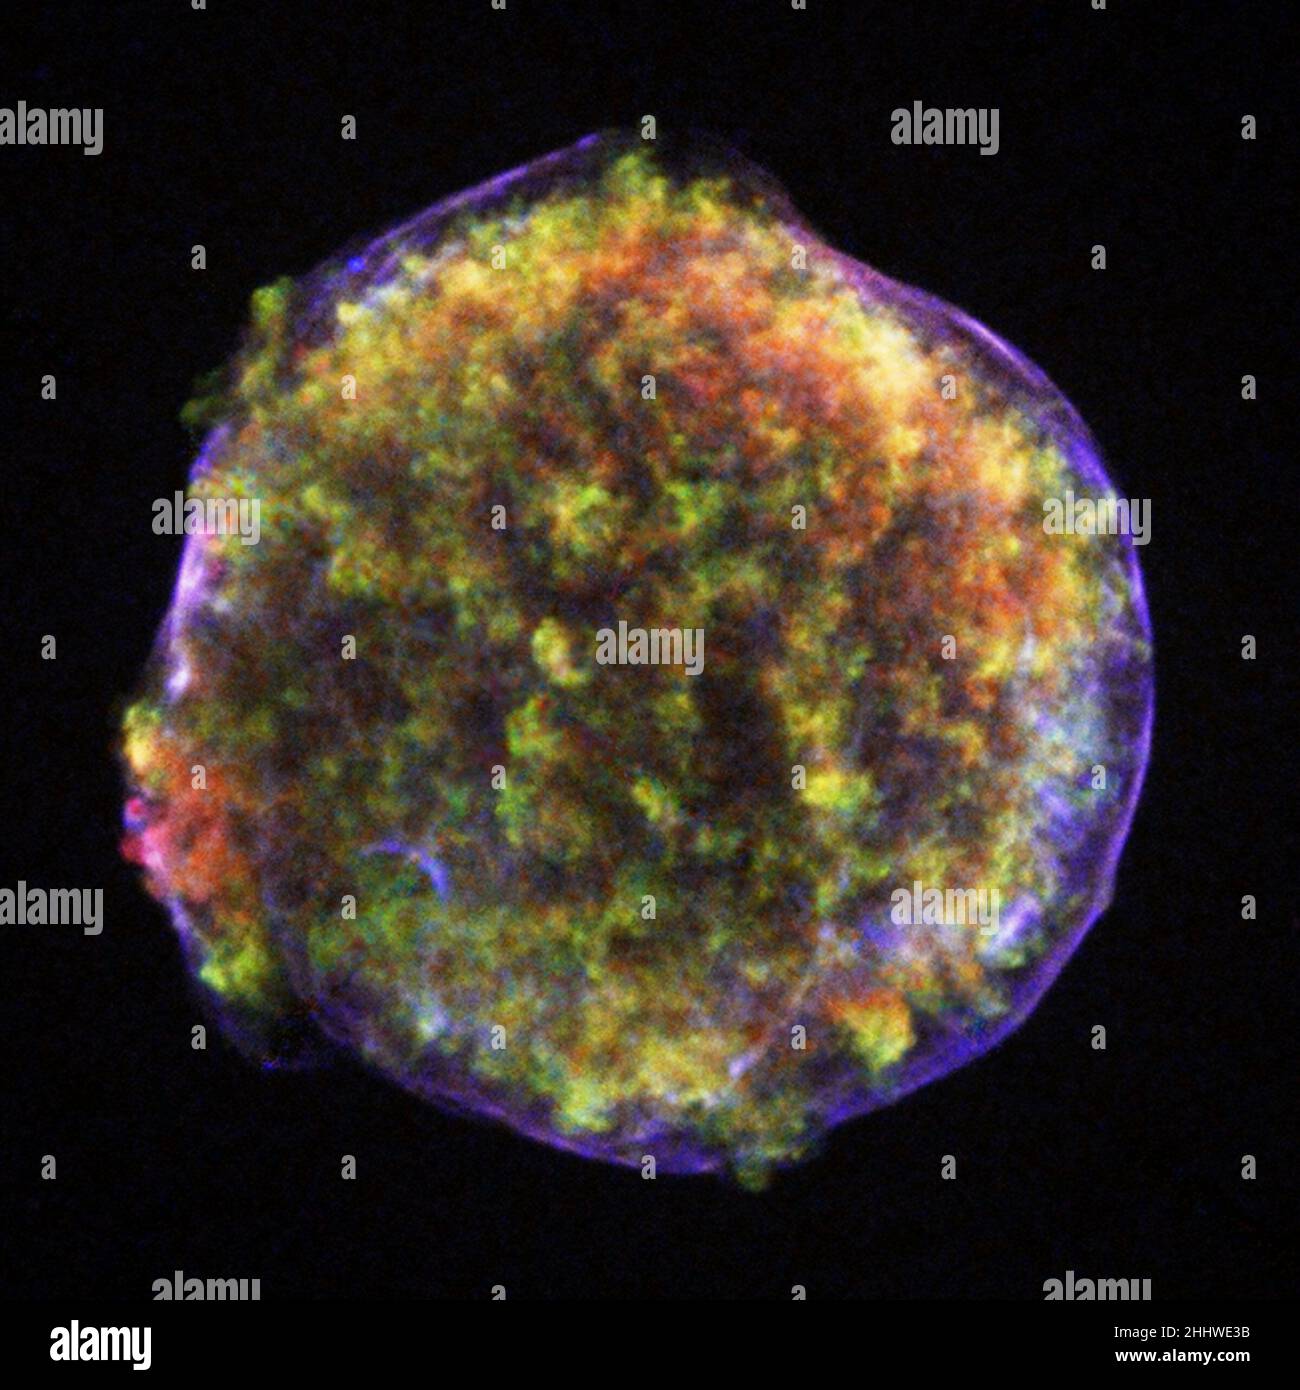 Tycho's Supernova Remnant. In 1572, the Danish astronomer Tycho Brahe observed and studied the explosion of a star that became known as Tycho's supernova. More than four hundred years later, this photo of the supernova remnant shows an expanding bubble of multimillion degree debris (green and red) inside a shell of extremely high energy electrons (filamentary blue) expanding at an estimated 5000 km/s. photo from Chandra X-ray observatory. Stock Photo